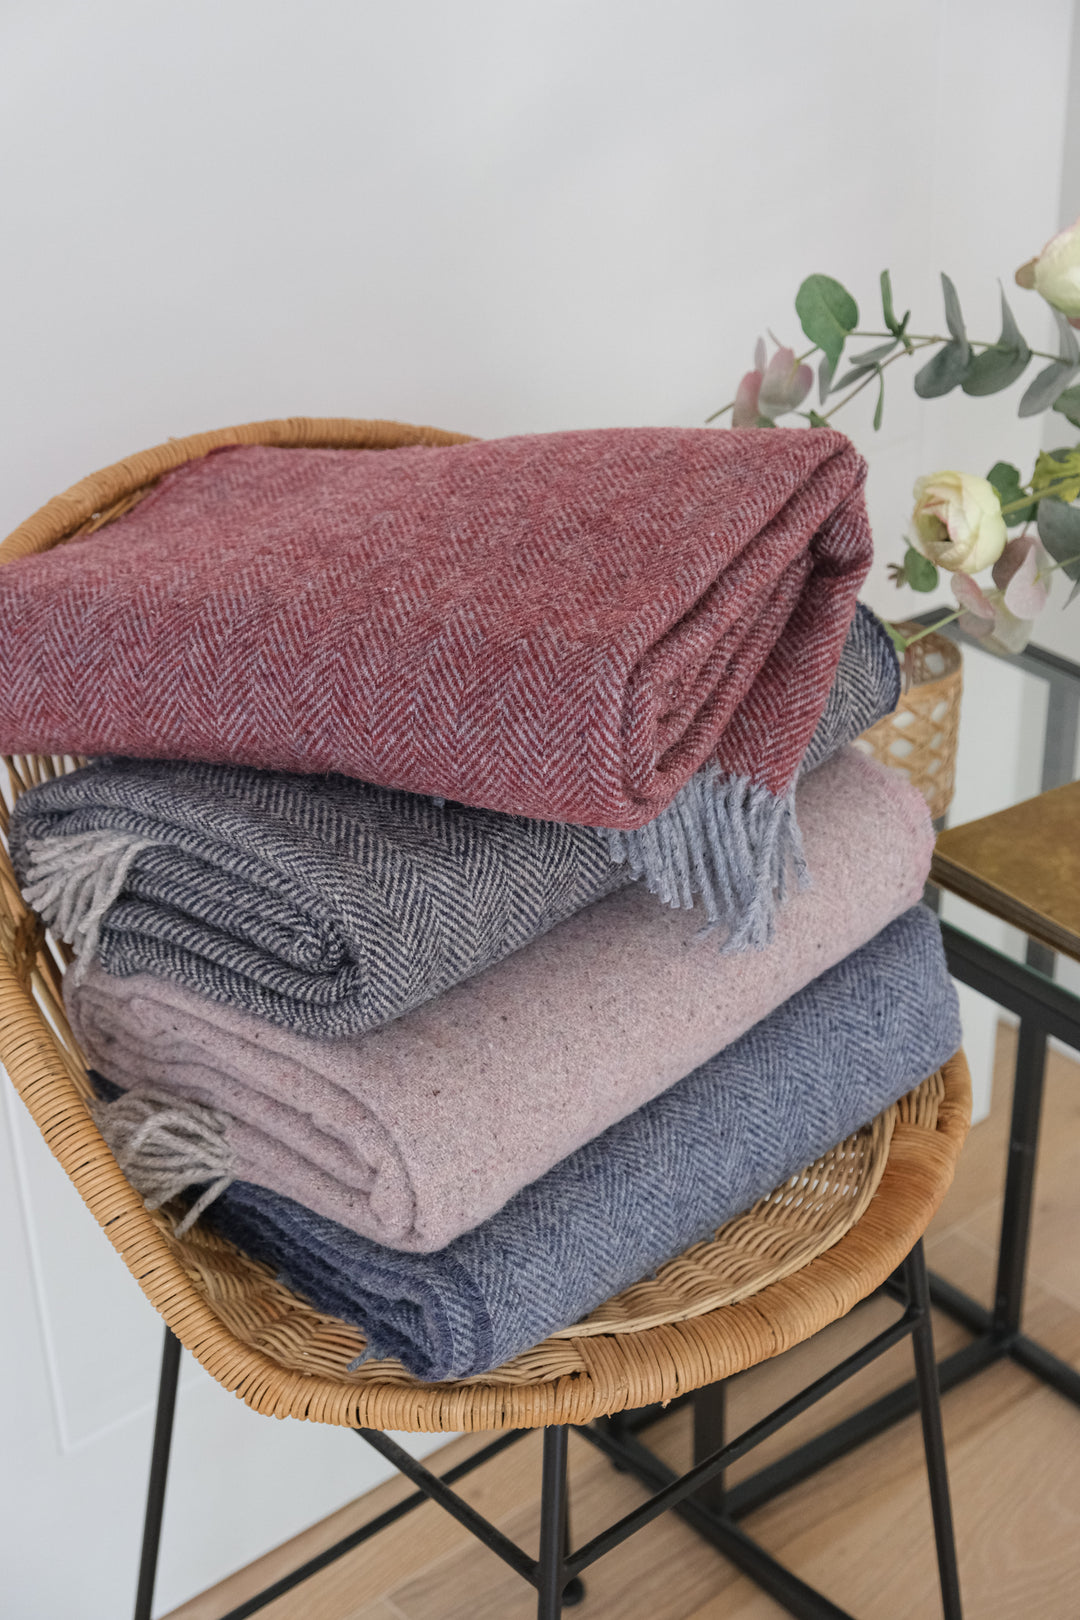 Stack of Cashmere and Merino Recycled Wool Blankets on a chair by Turtle Doves for The British Blanket Company